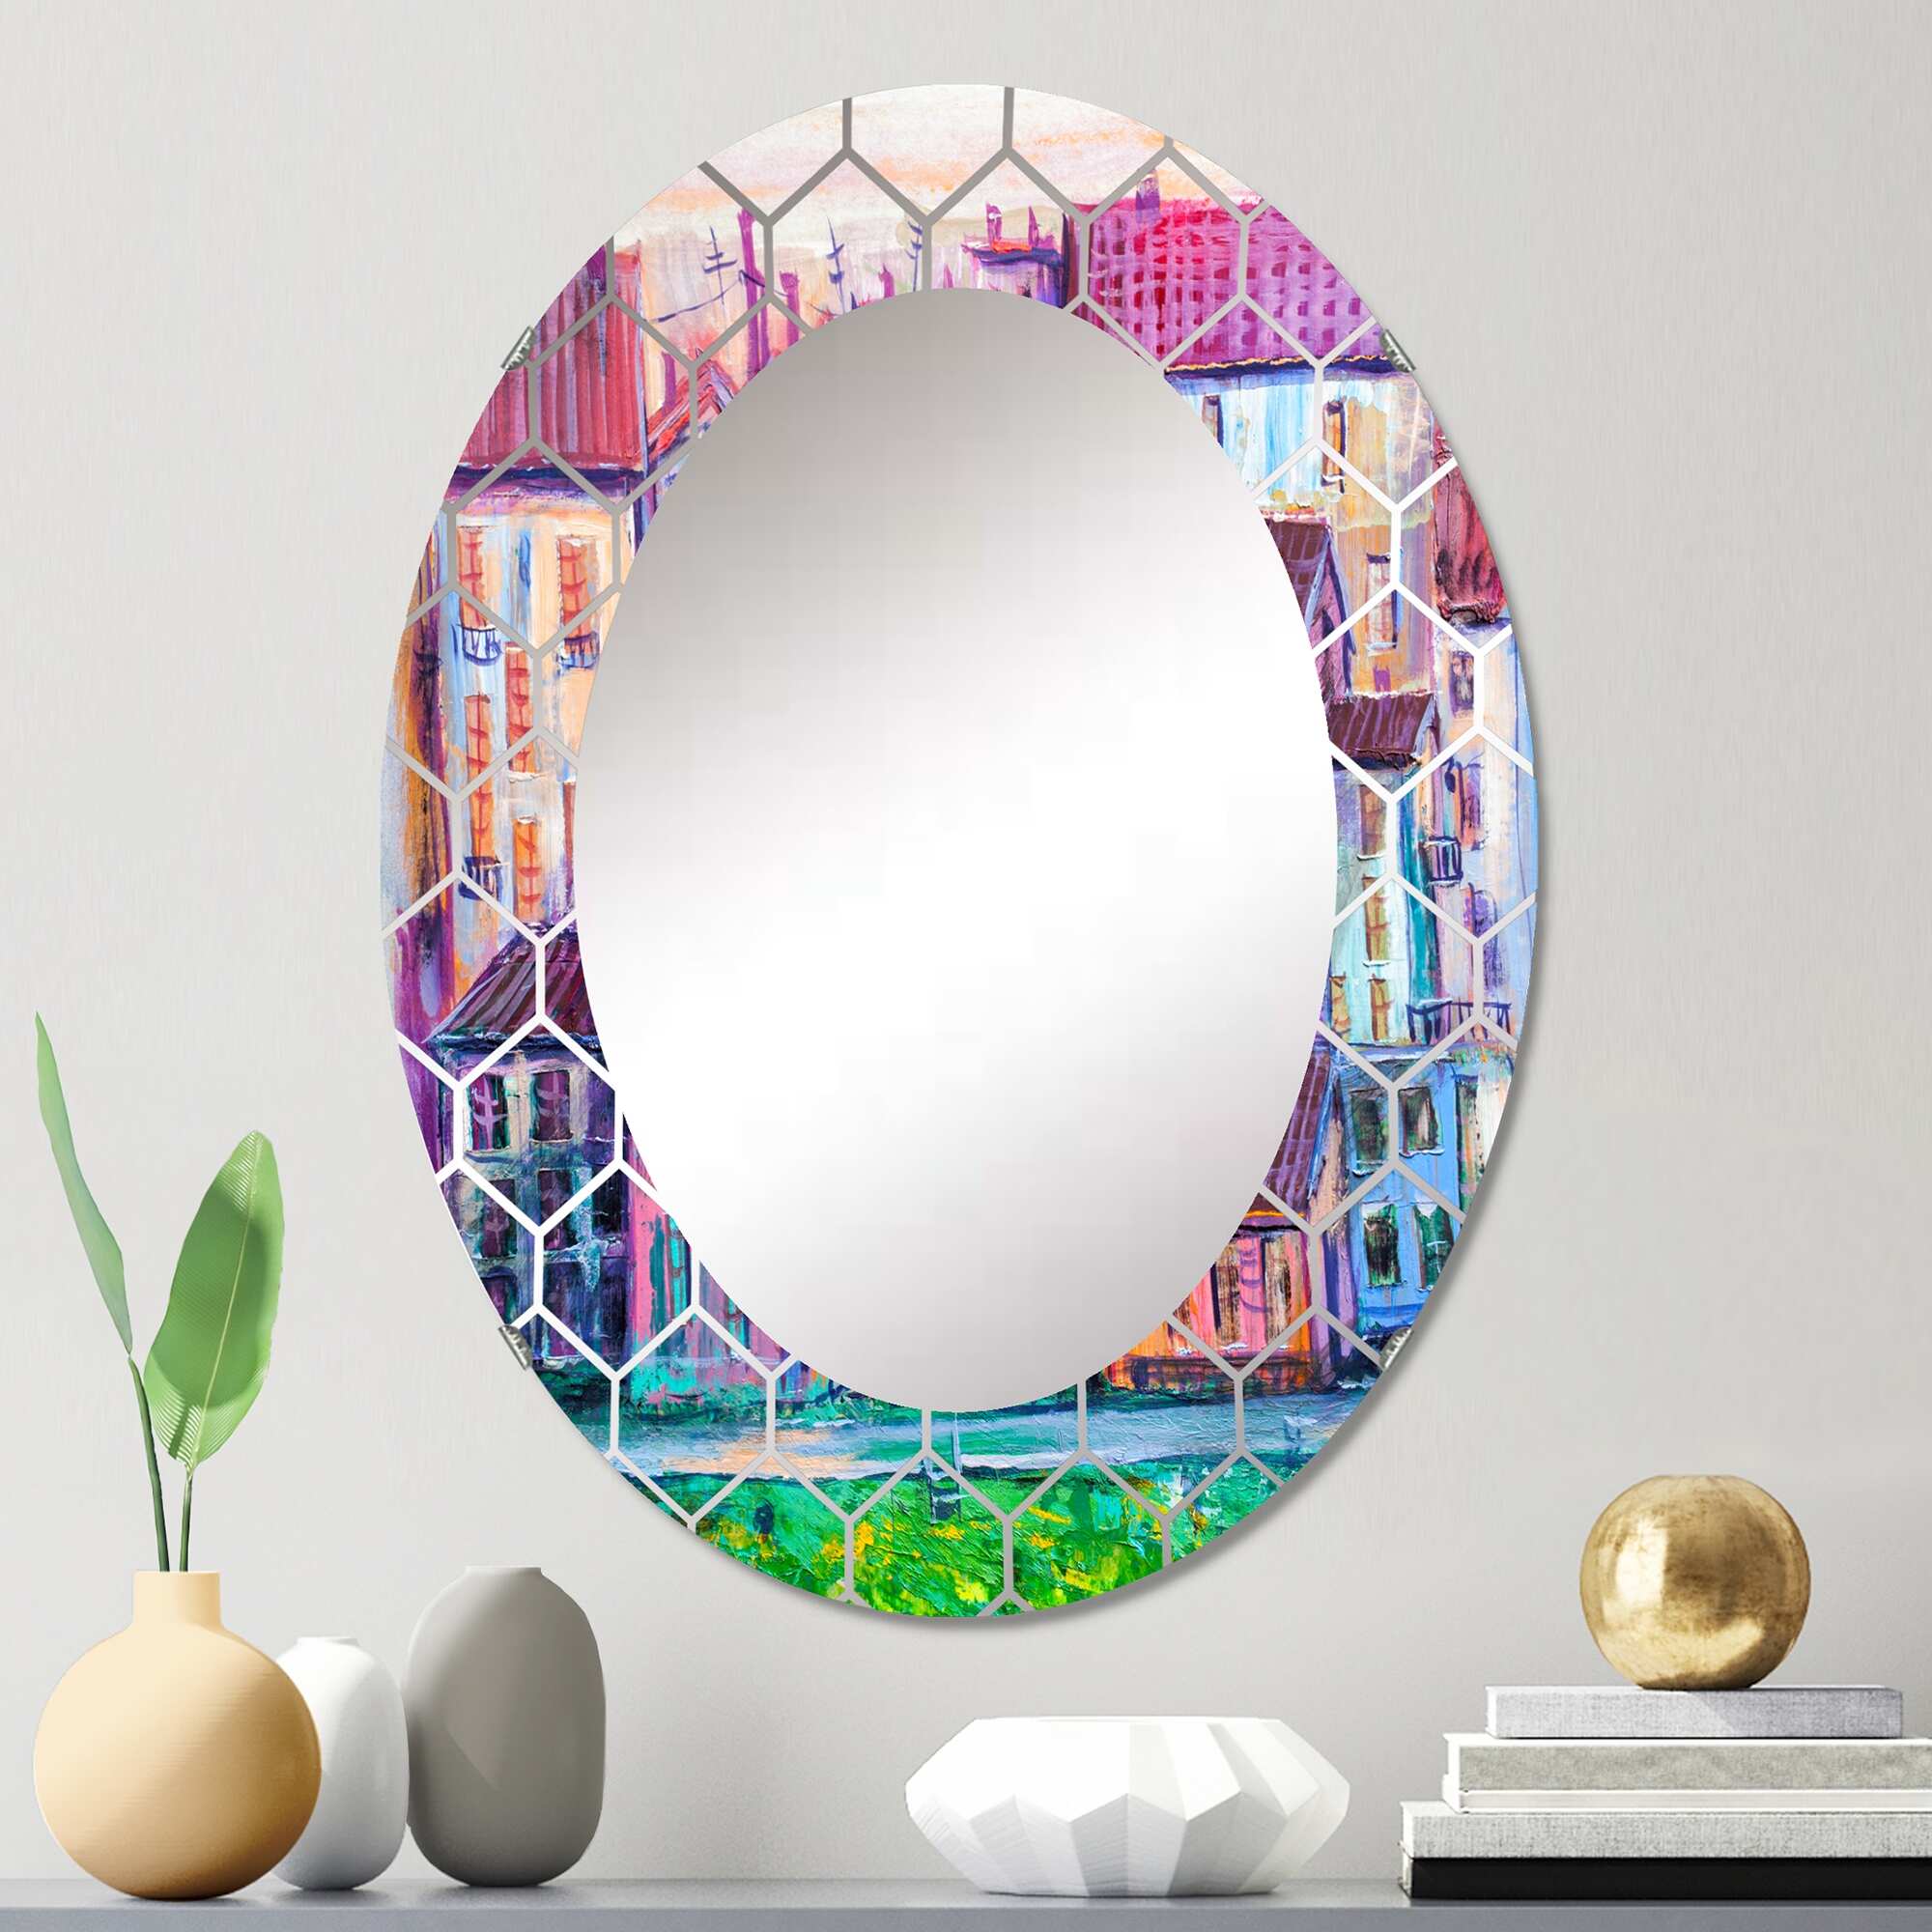 Designart 'Street With Colorful Old Homes' Printed Modern Wall Mirror